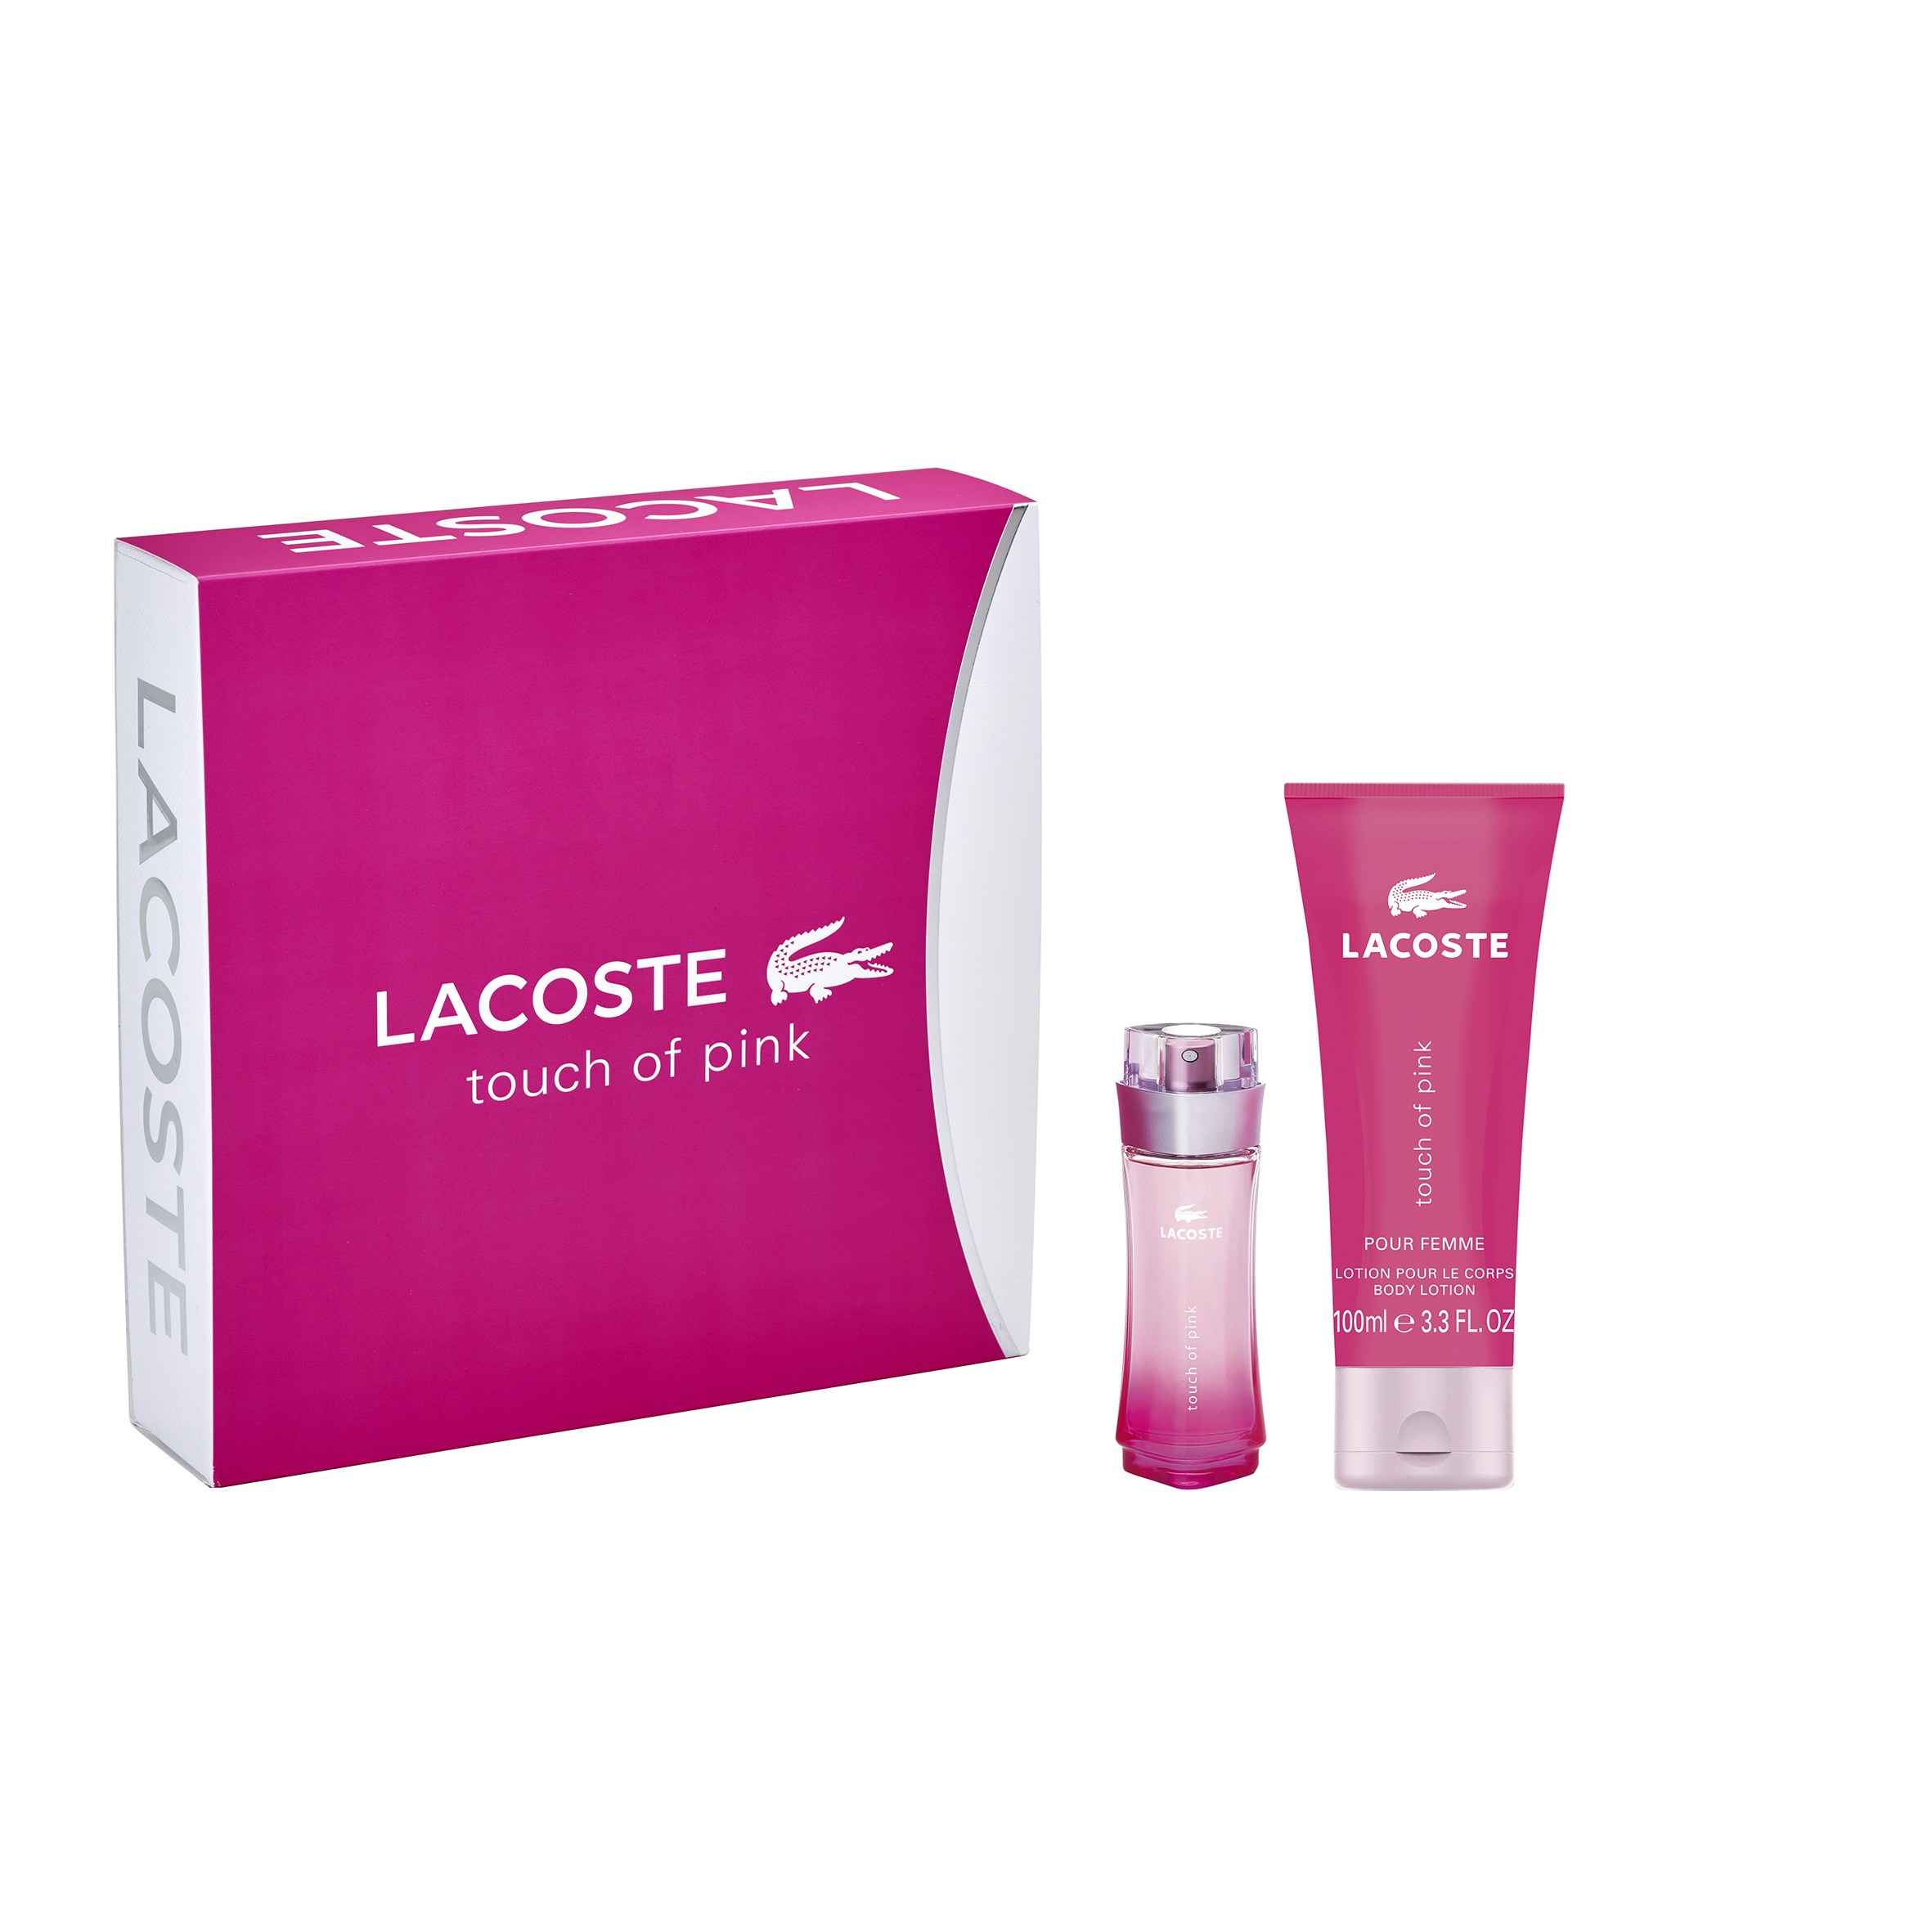 lacoste a touch of pink gift set